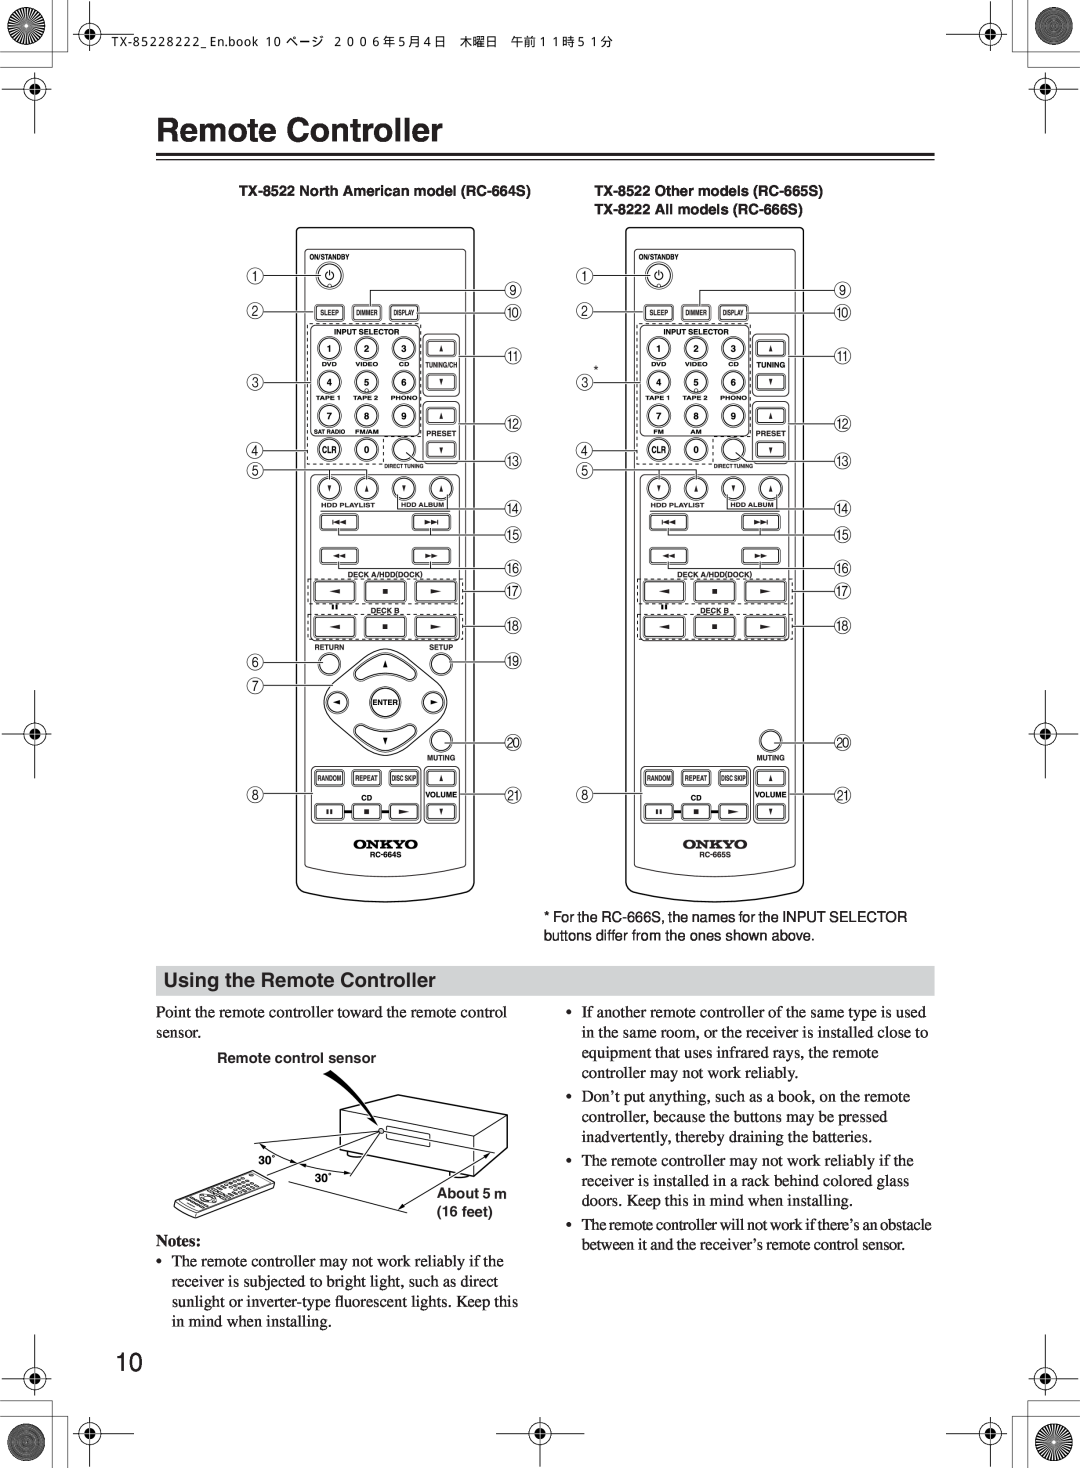 Onkyo TX-8222, TX-8522 instruction manual Using the Remote Controller 